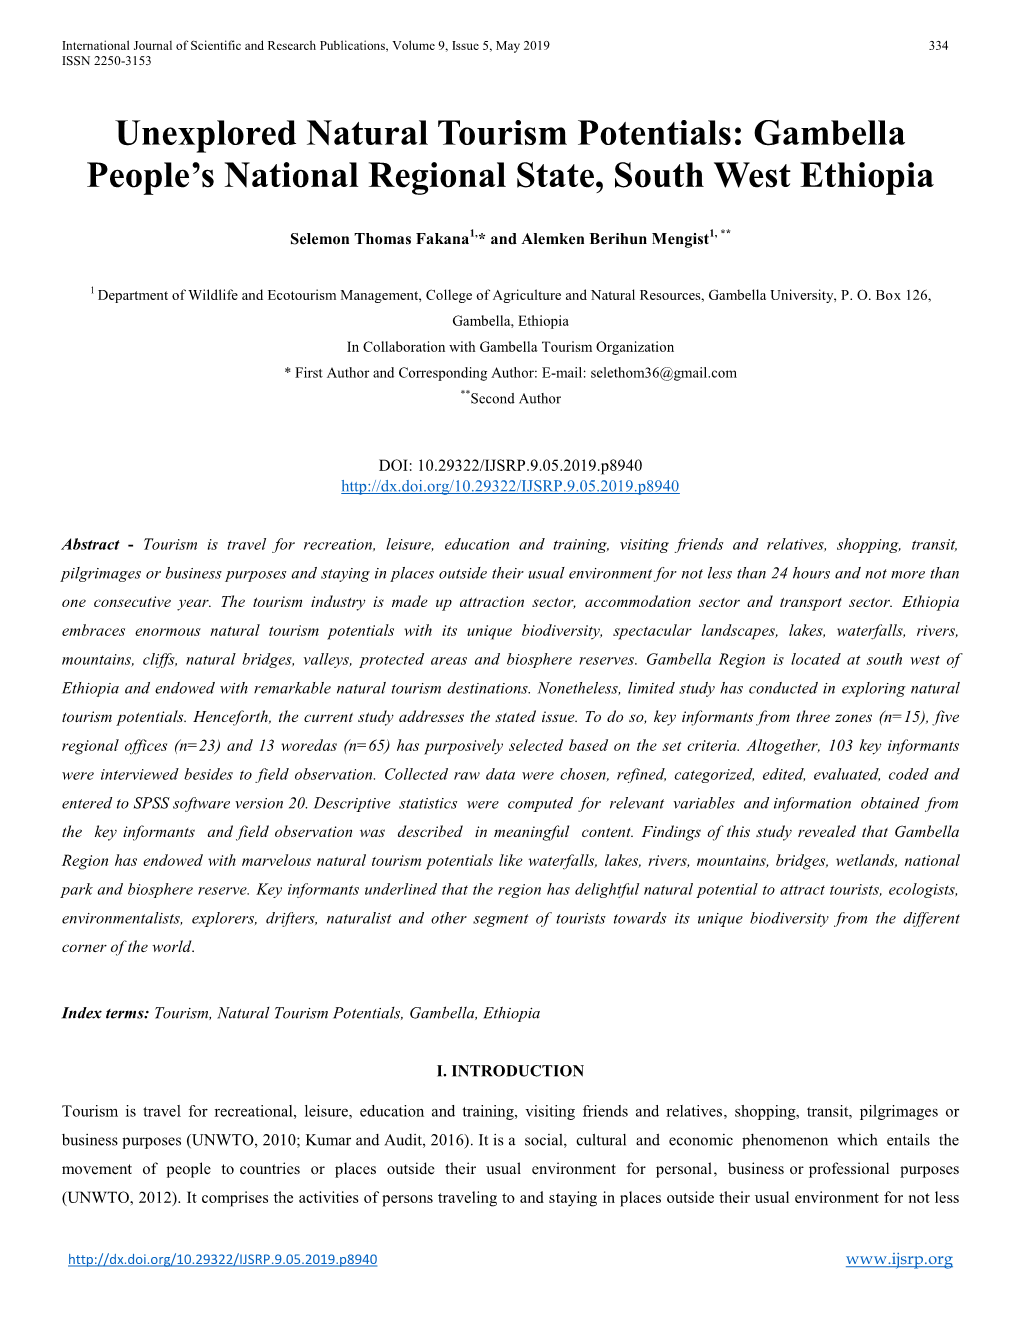 Unexplored Natural Tourism Potentials: Gambella People's National Regional State, South West Ethiopia